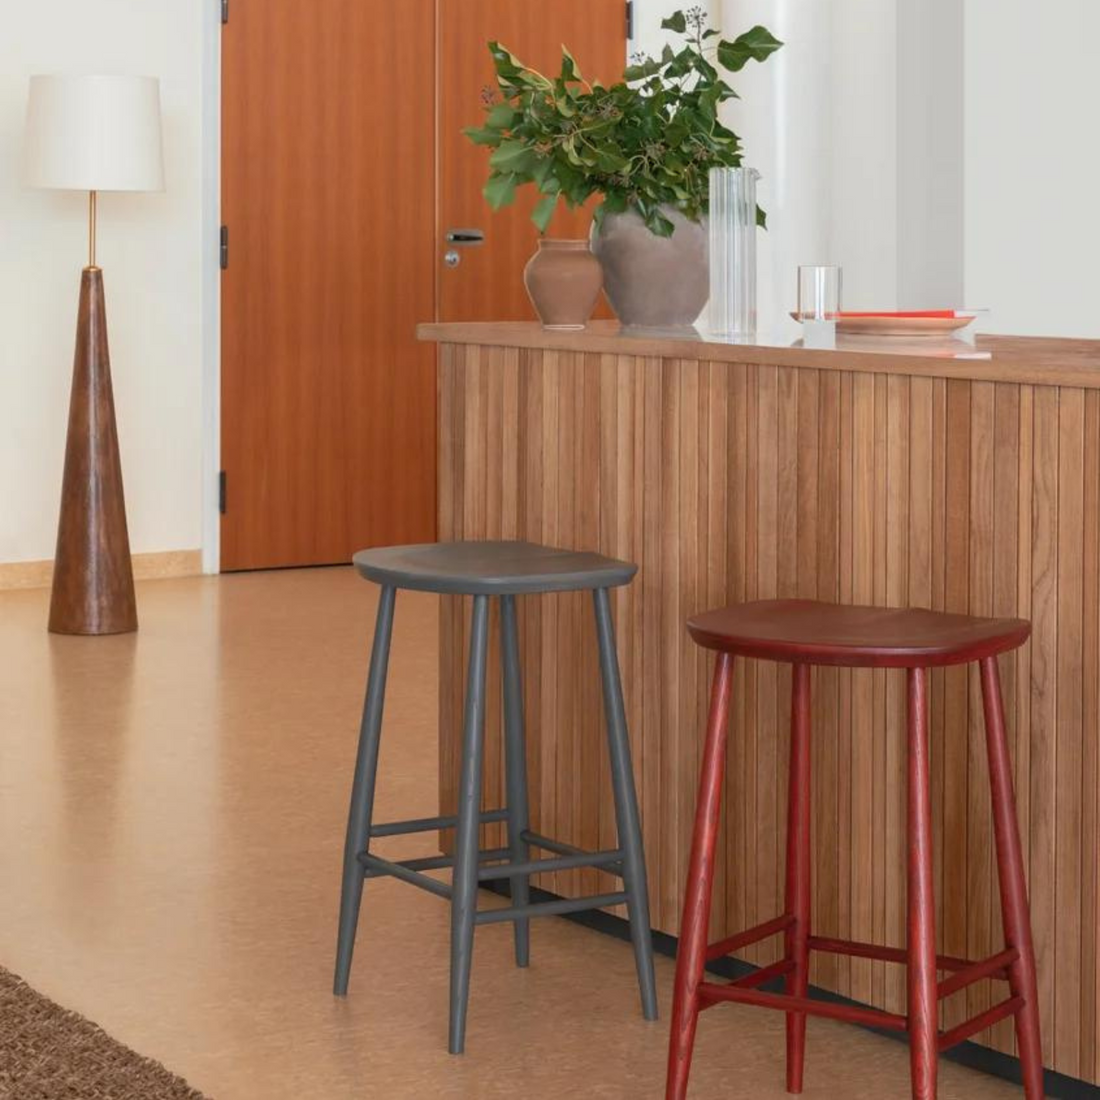 Utility | Counter Stool